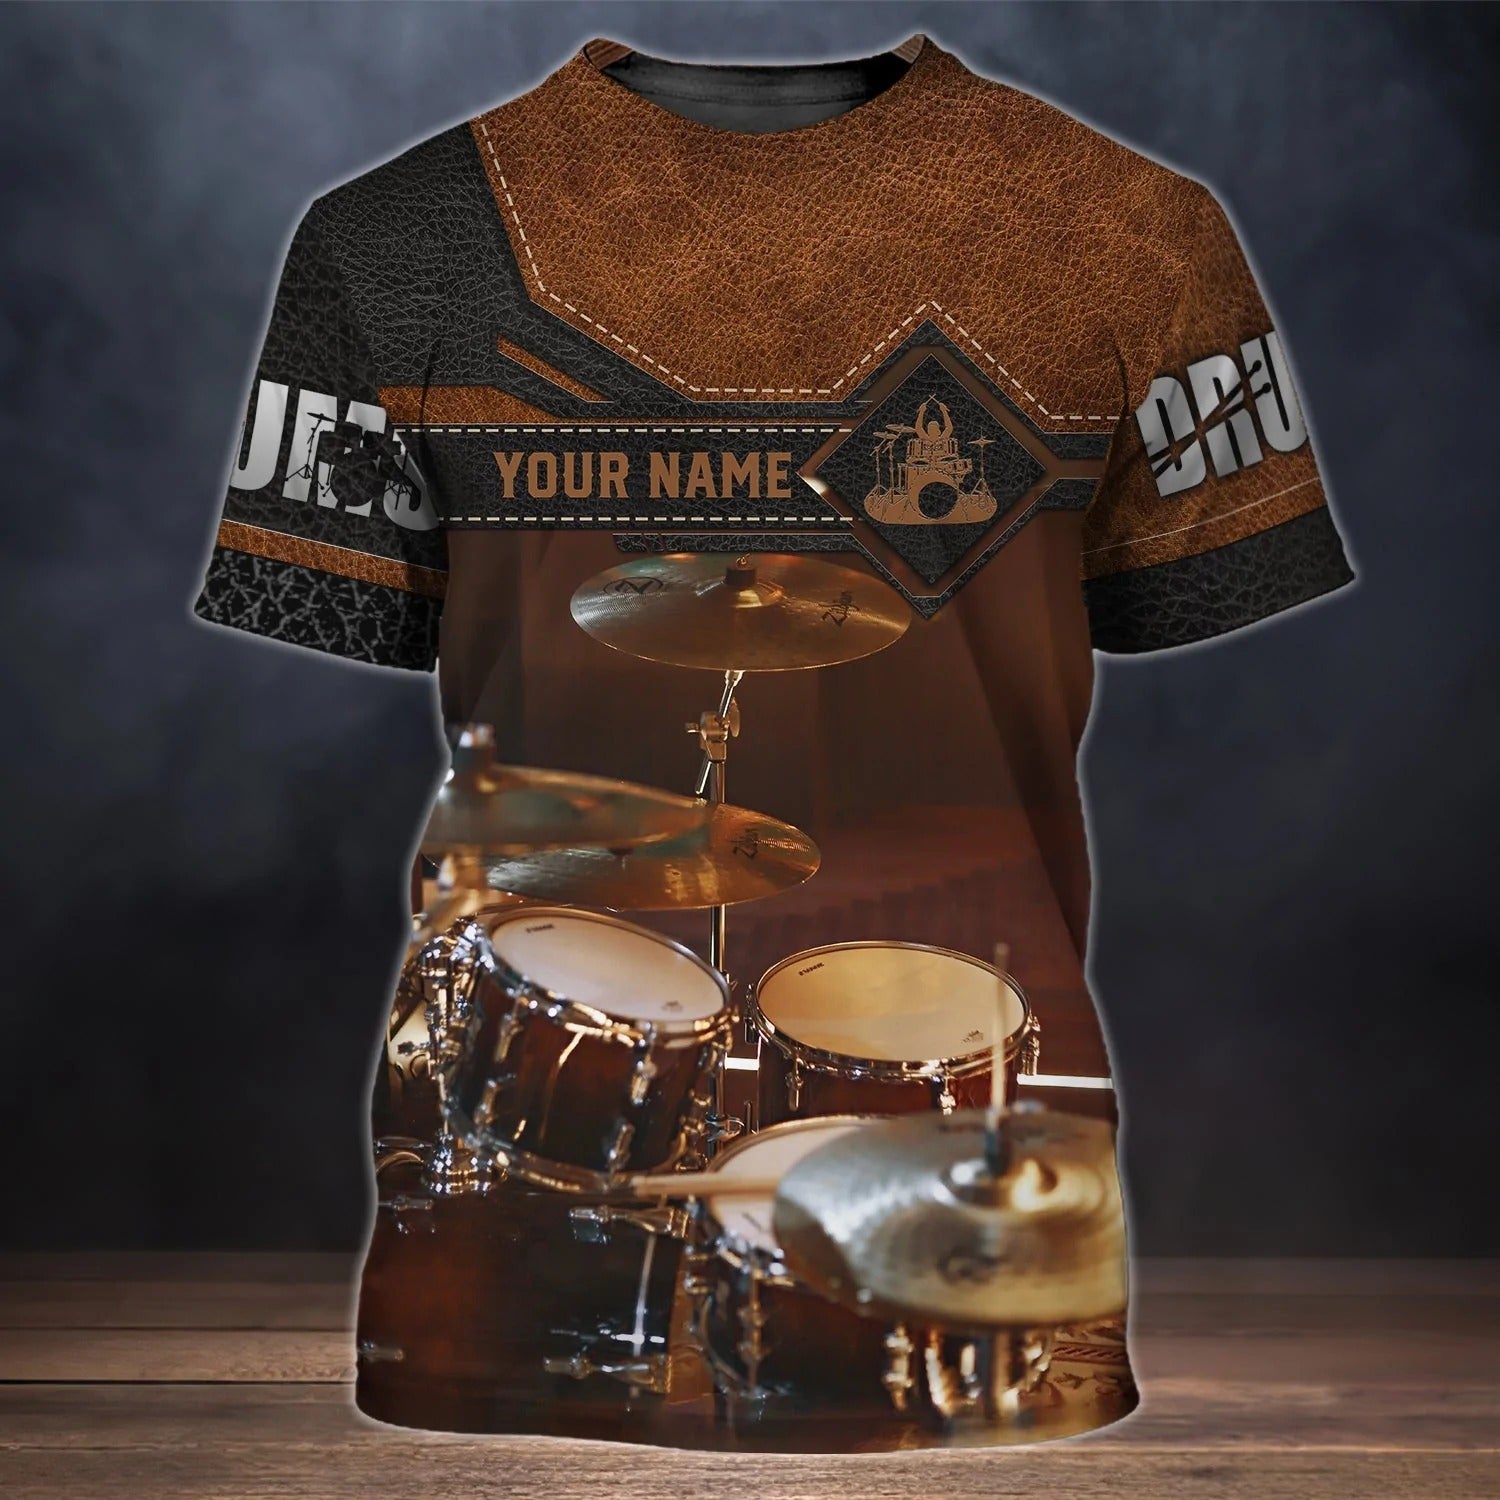 3D Print Brown T Shirt For A Drummer/ Drum Print On Shirt Leather Pattern/ Custom Shirt For A Drummer